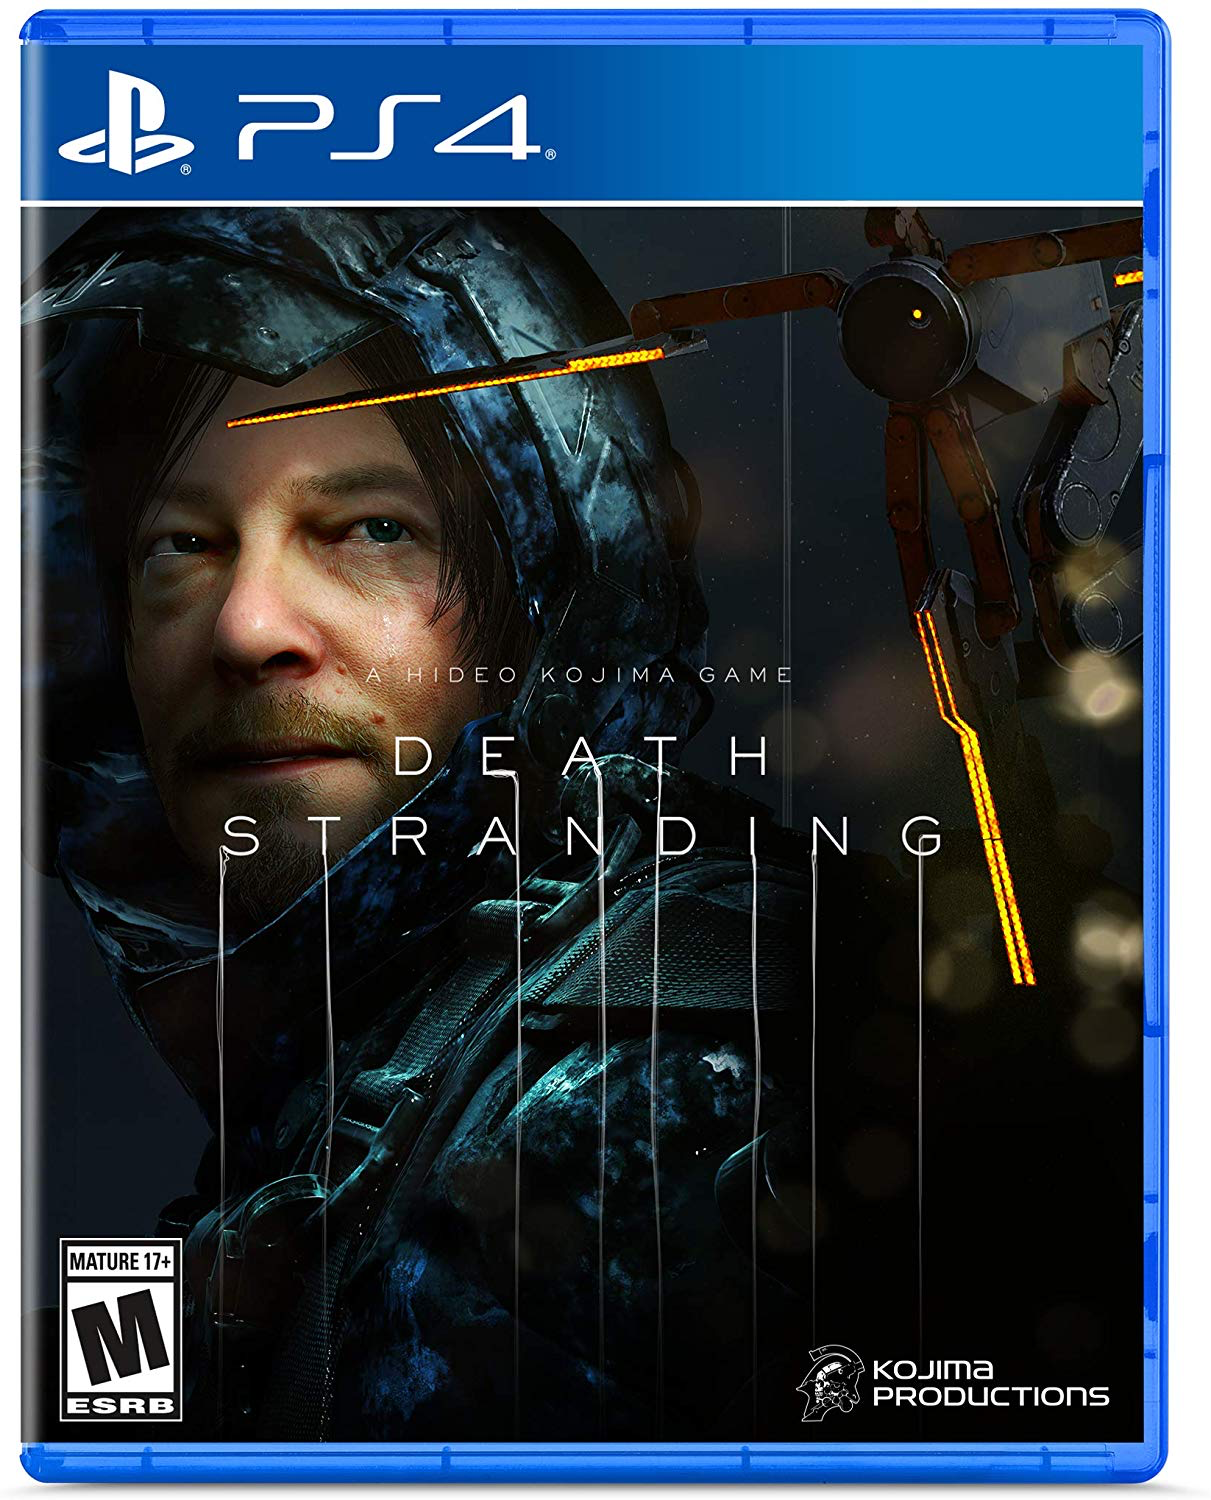 Hideo Kojima's Death Stranding Has Started A New Genre Of Game